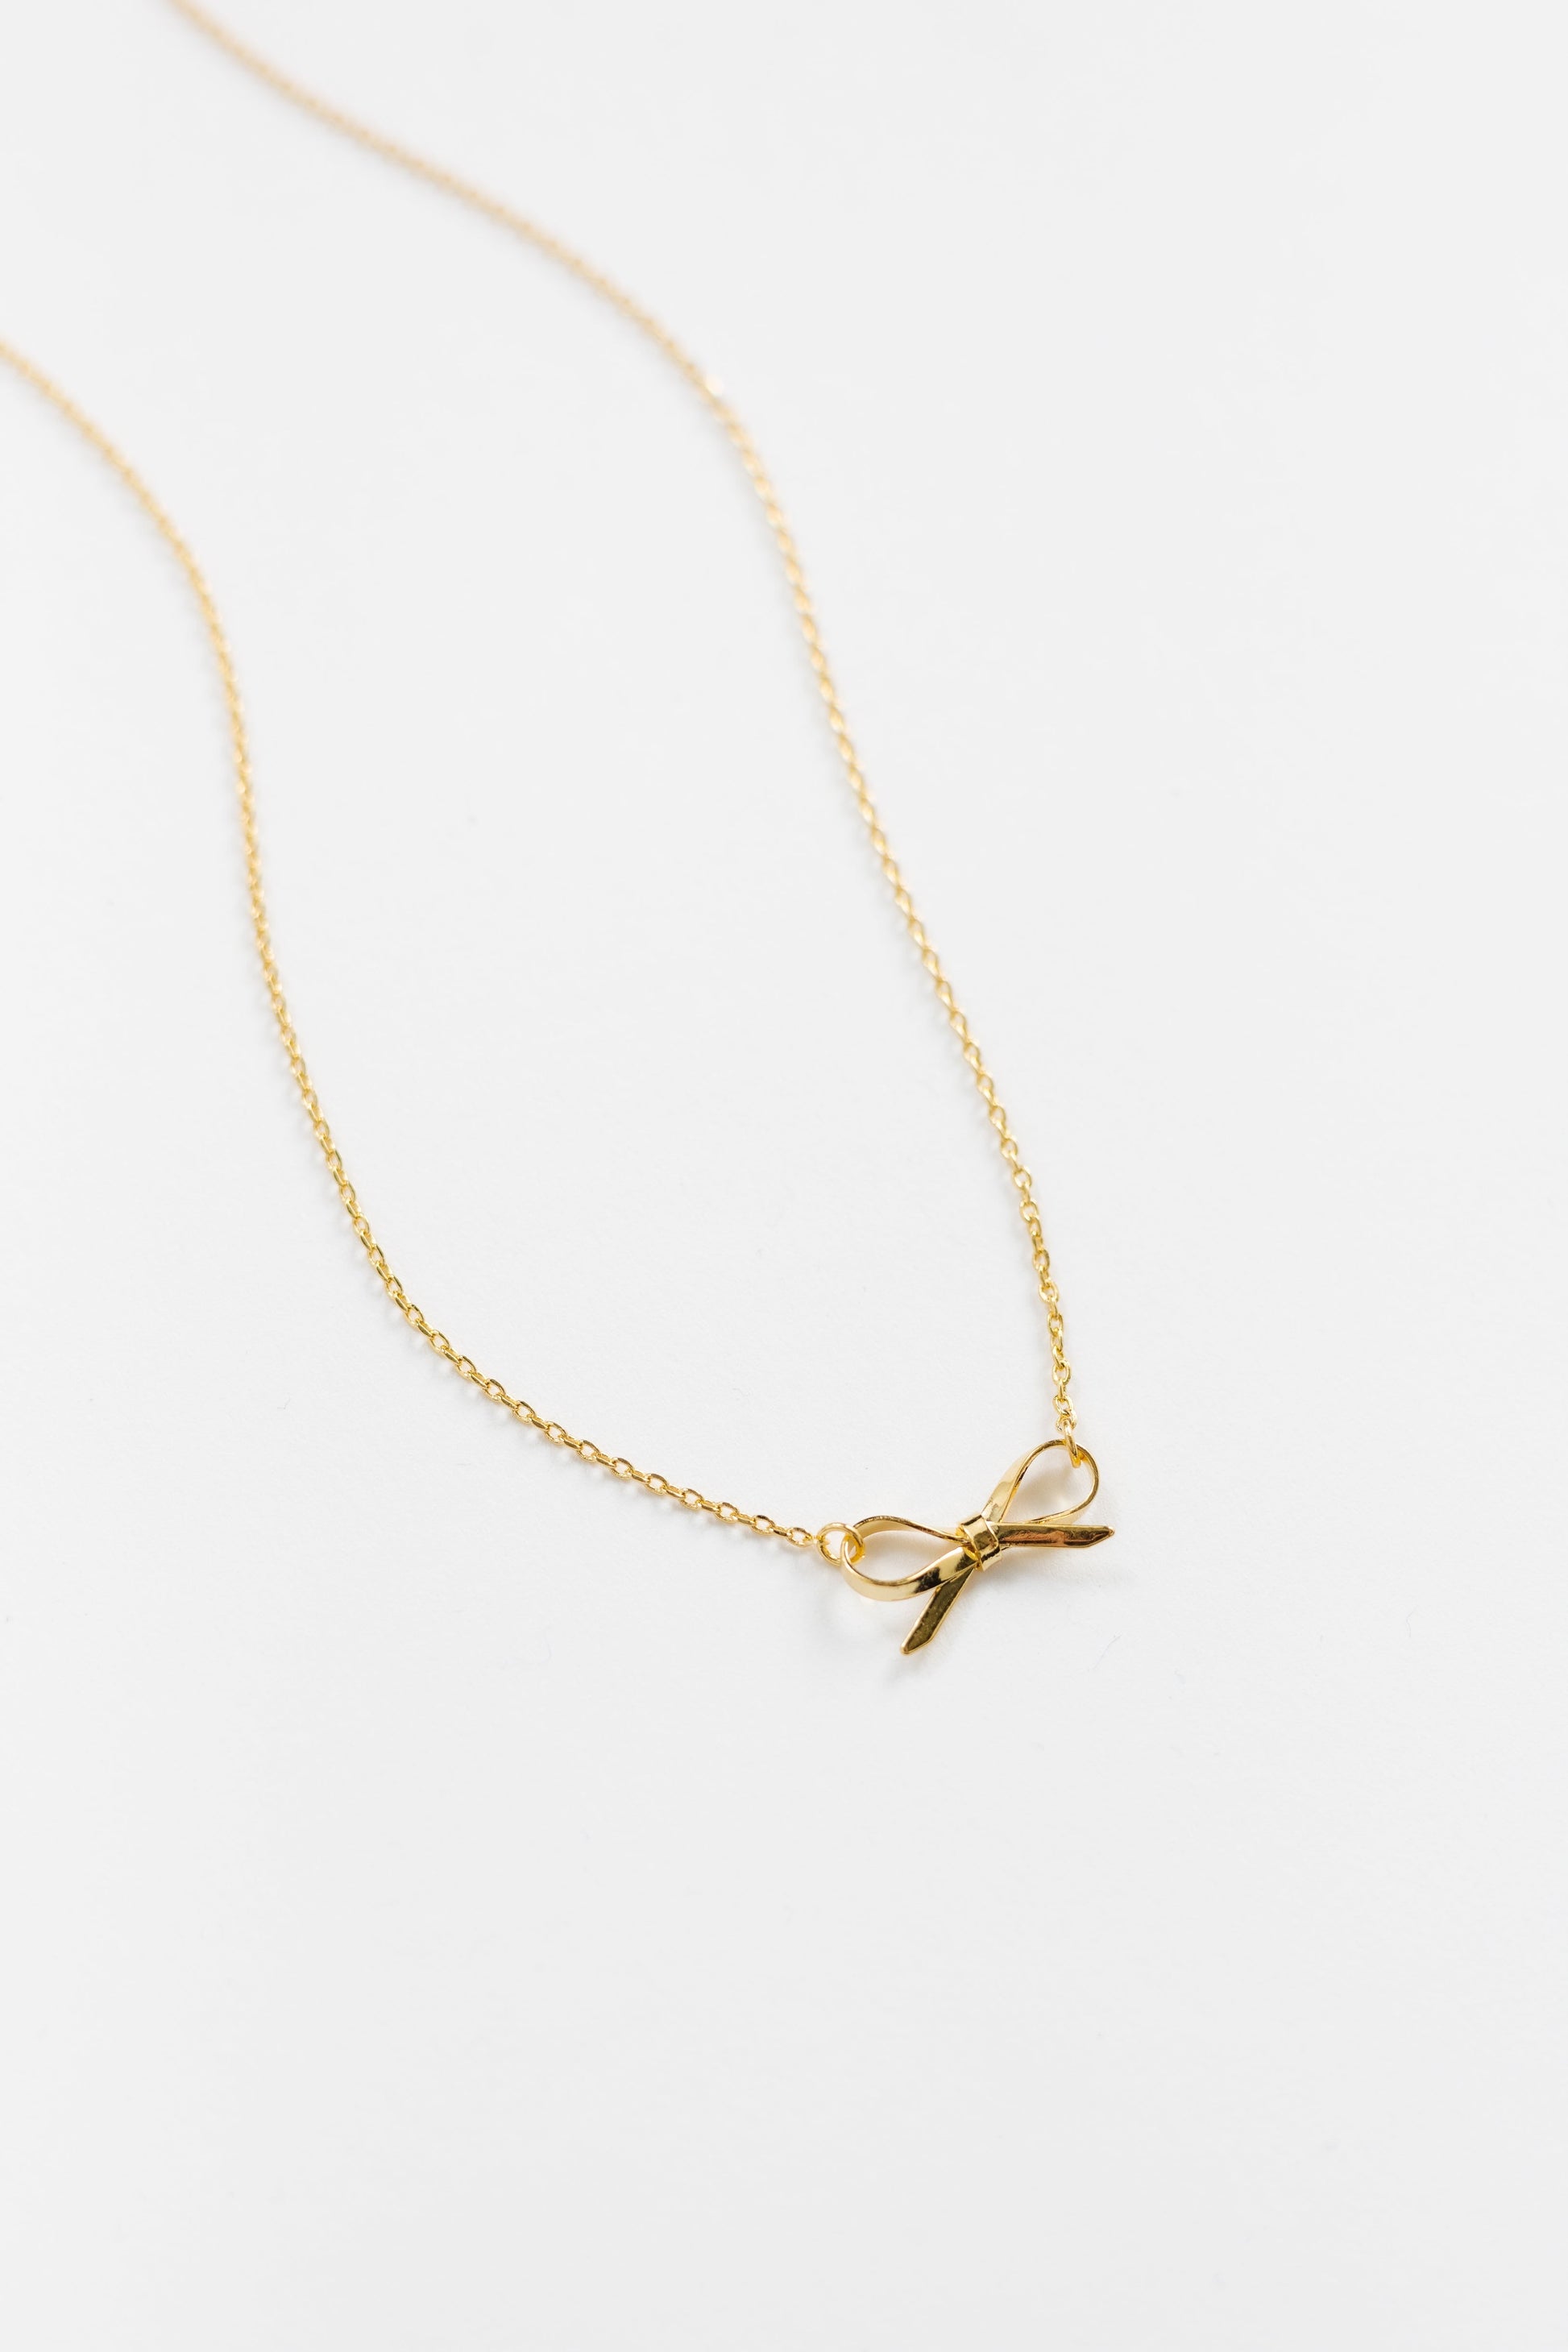 Cove Bow Necklace WOMEN'S NECKLACE Cove Accessories Gold 16" 